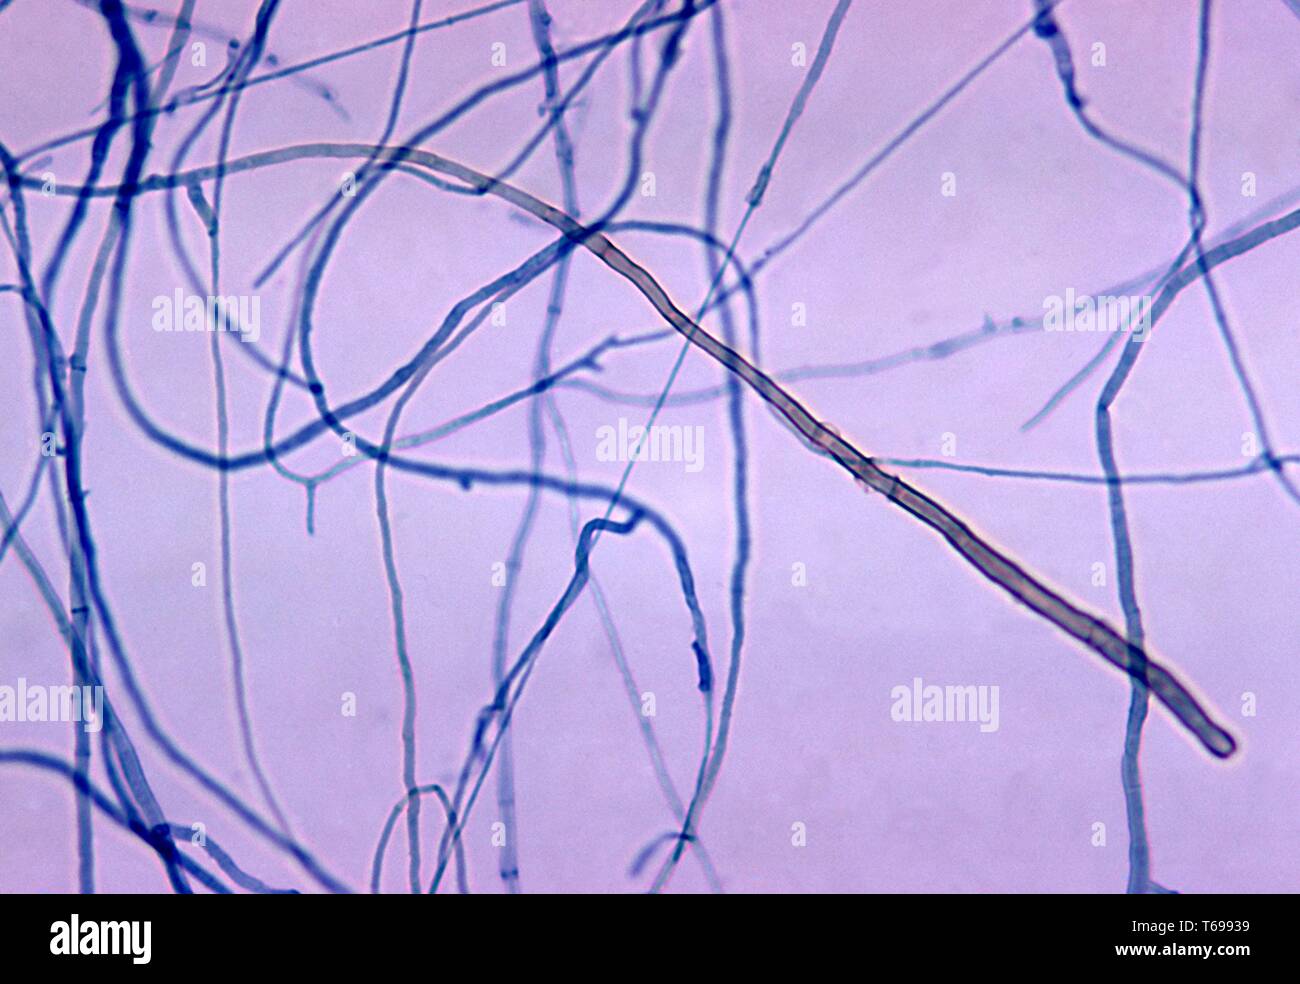 Photomicrograph of a conidiophore and conidium of the fungus Corynespora cassiicola, 1970. Image courtesy Centers for Disease Control and Prevention (CDC). () Stock Photo